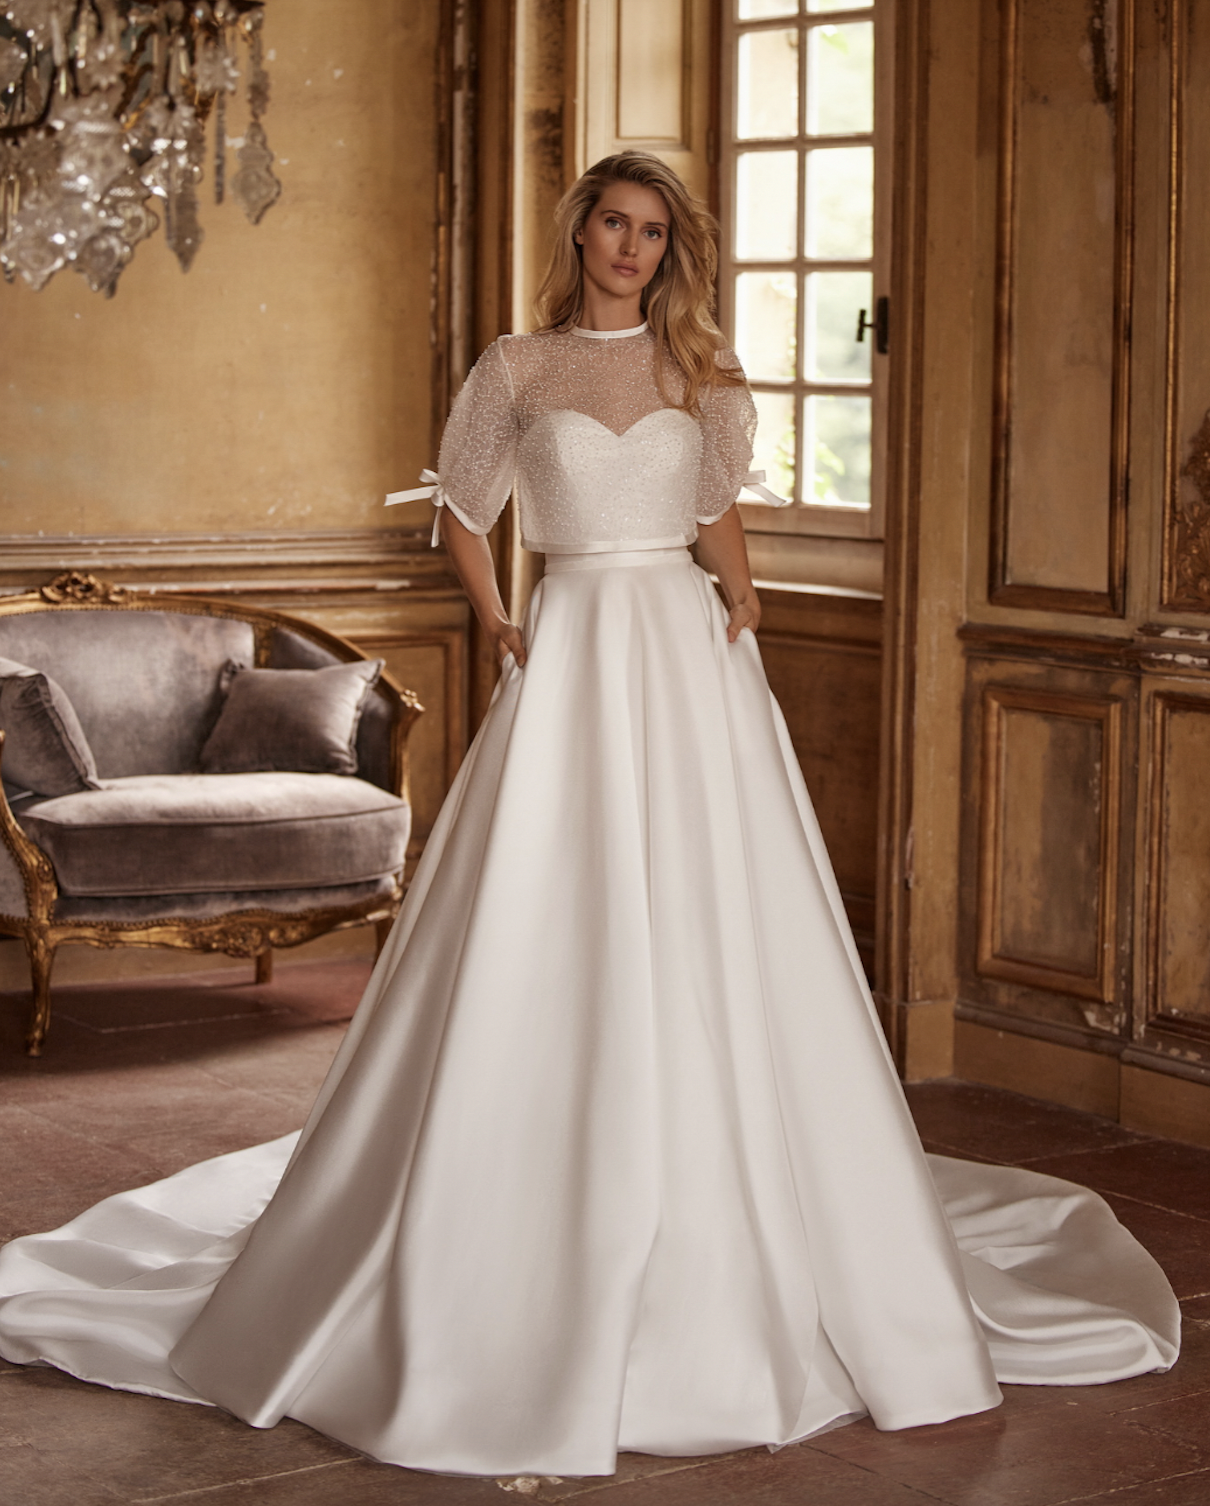 New Wedding Dress Trends Out Now for 2024! ⋆ Precious Memories Bridal Shop